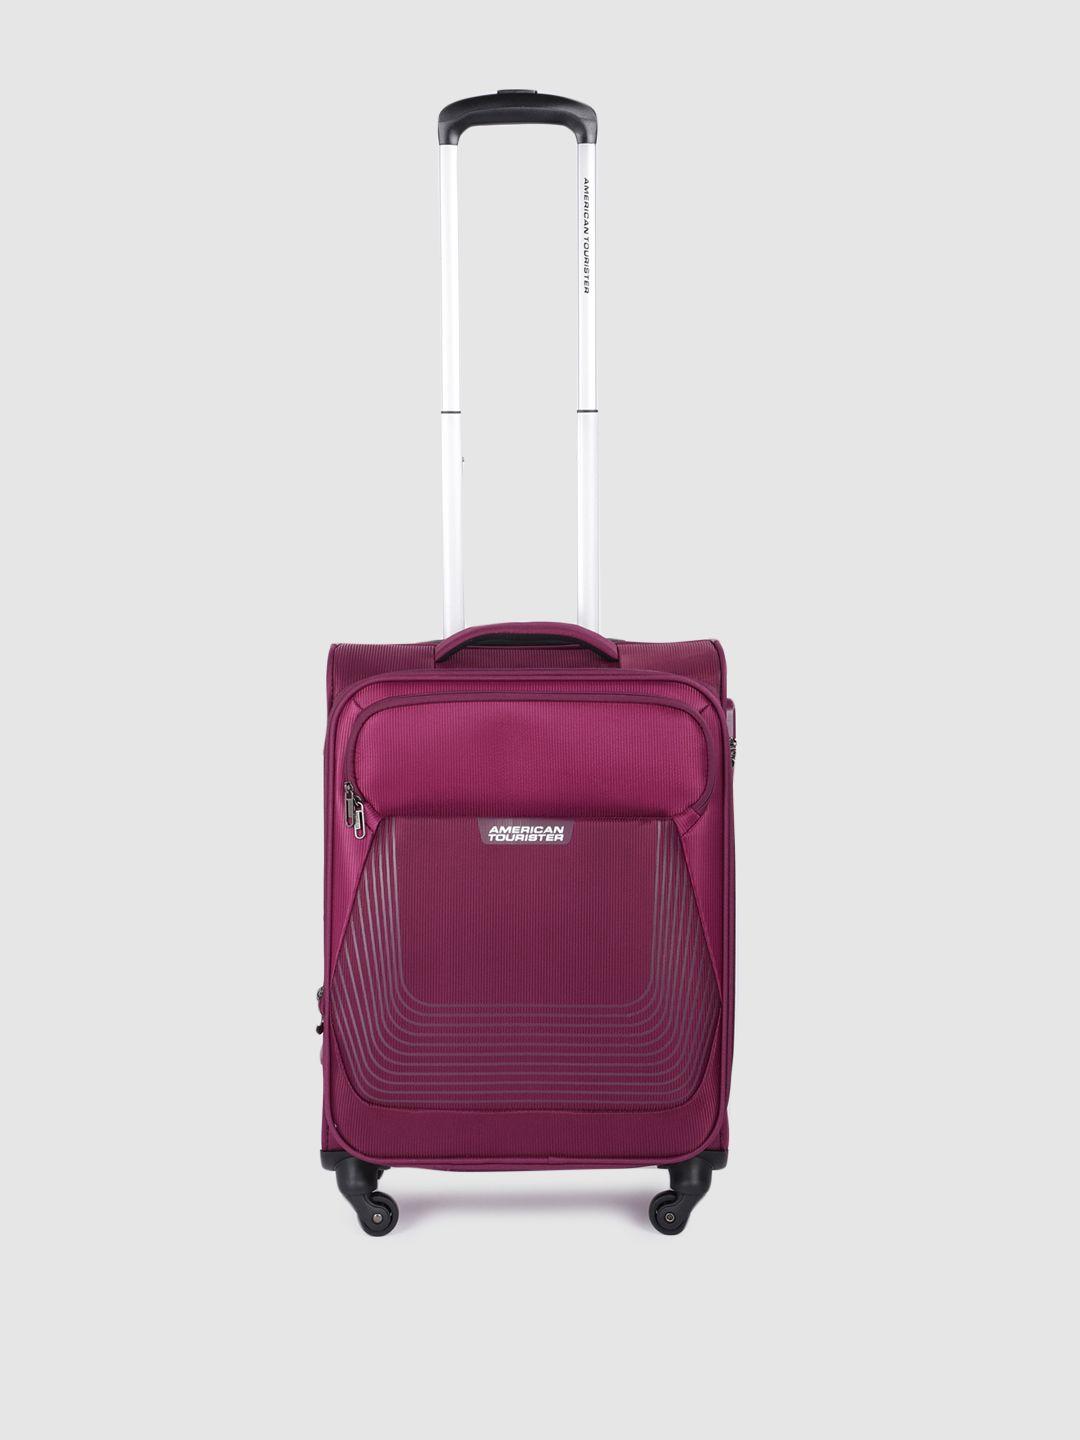 american-tourister-southside-lite-soft-cabin-trolley-suitcase